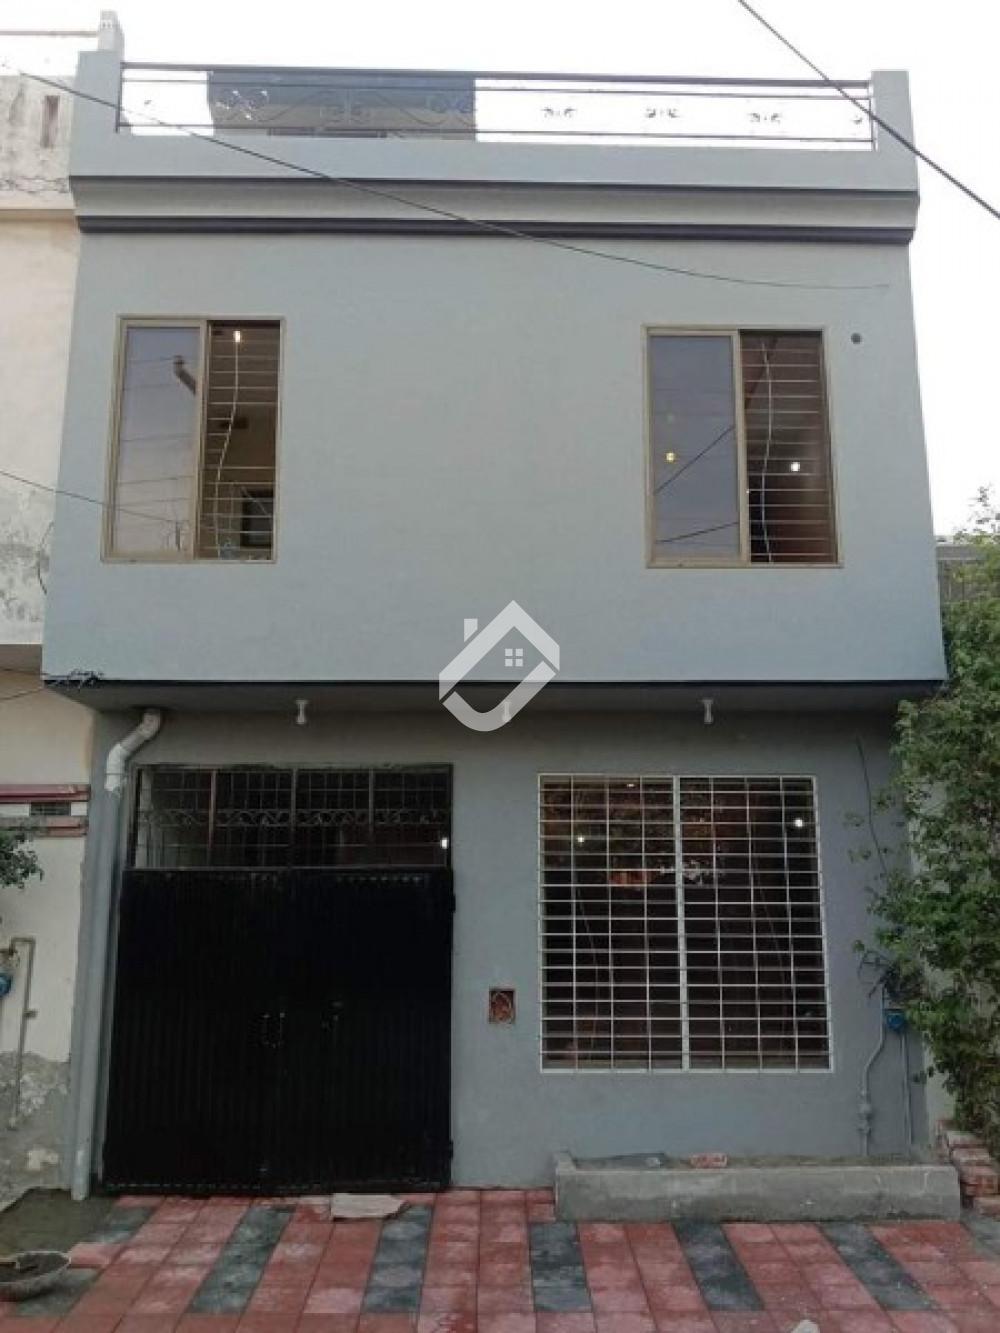 3.5 Marla House For Sale In Johar Town in Johar Town, Lahore